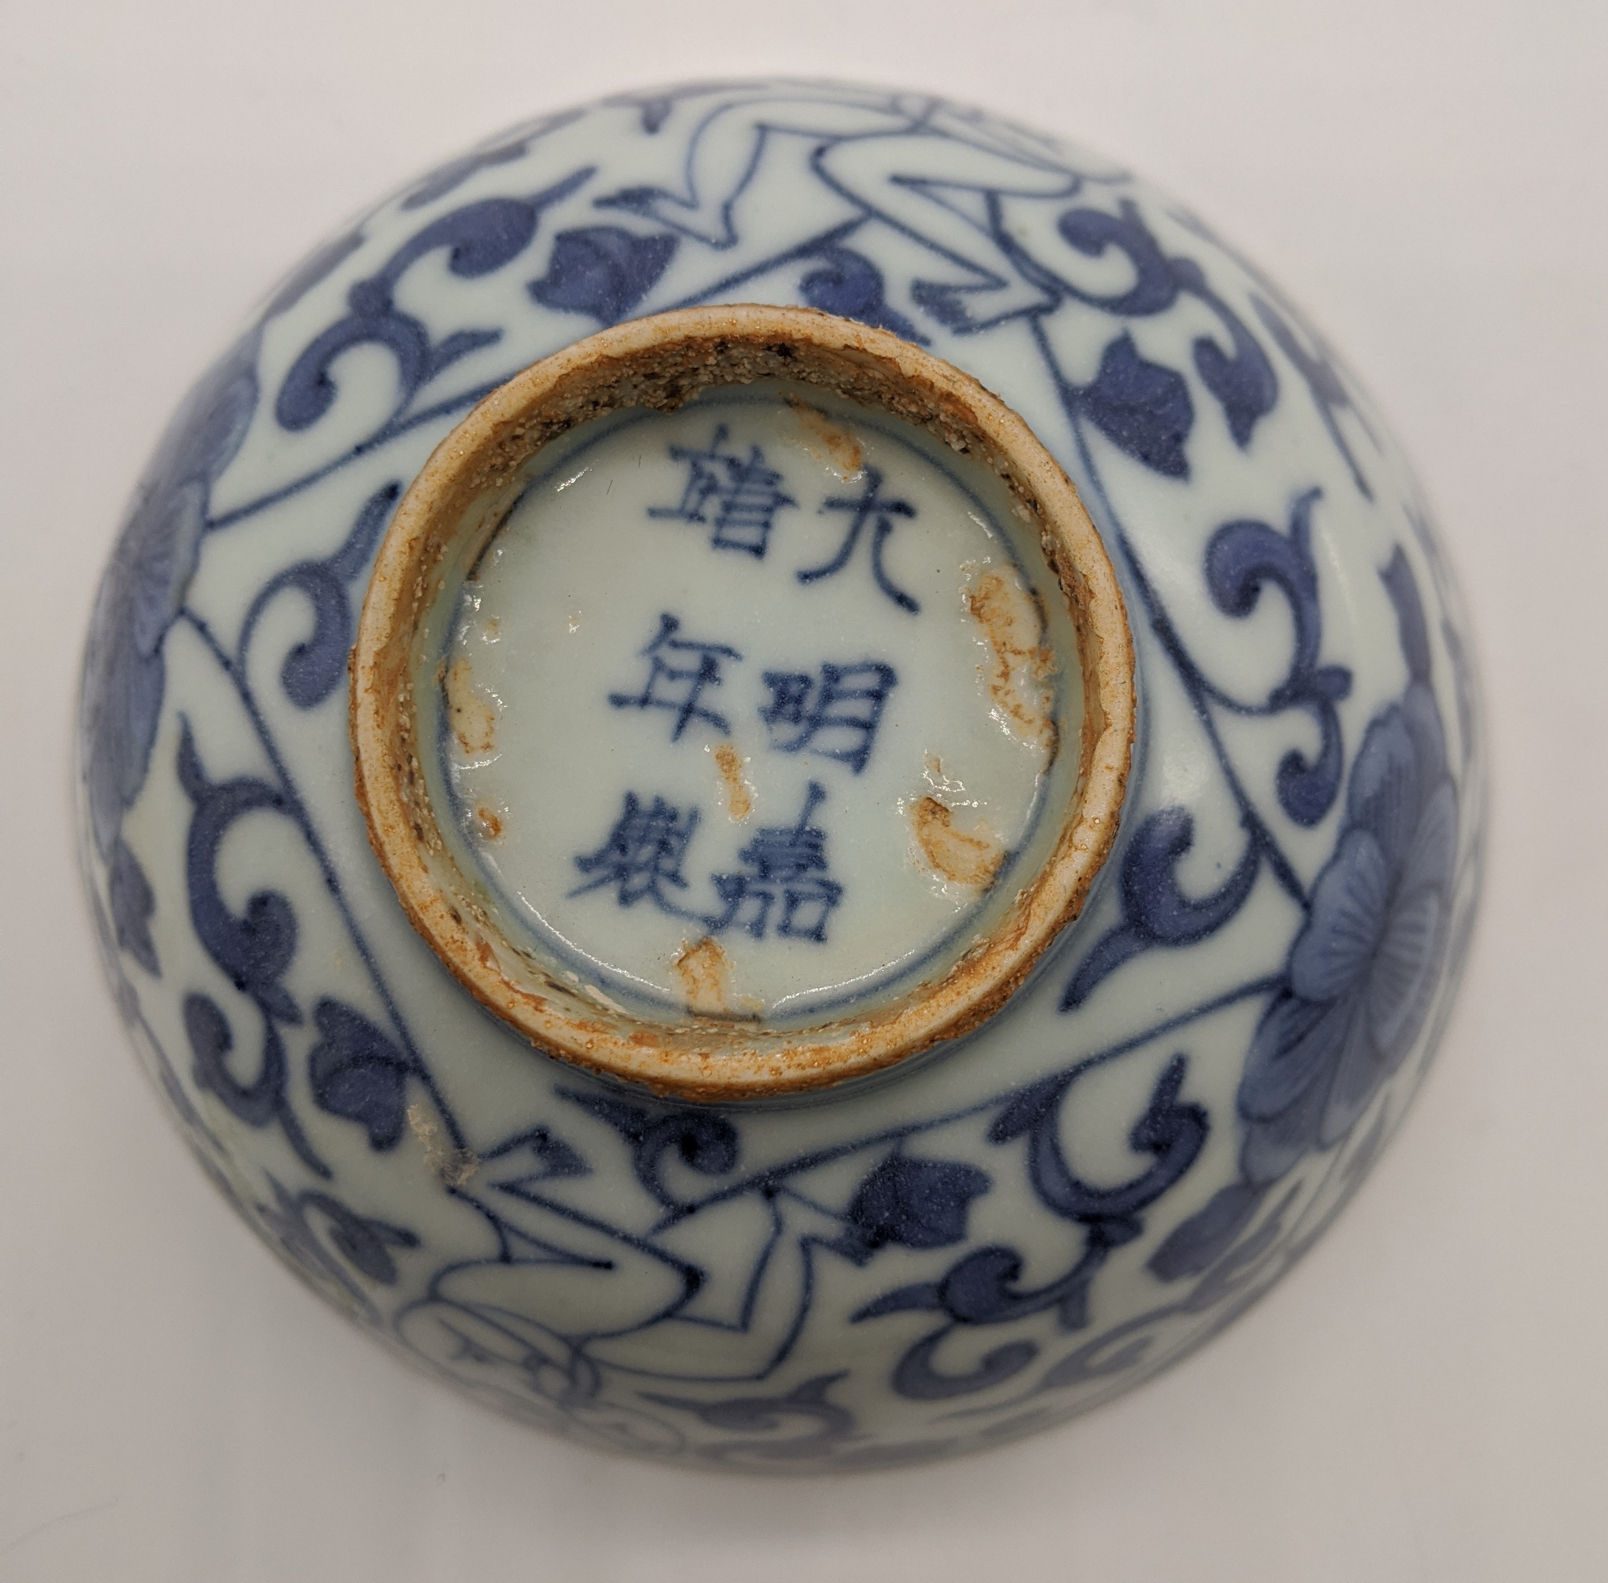 A Chinese Wanli period blue and white porcelain bowl with flora and figural scrolling decoration, - Image 6 of 7